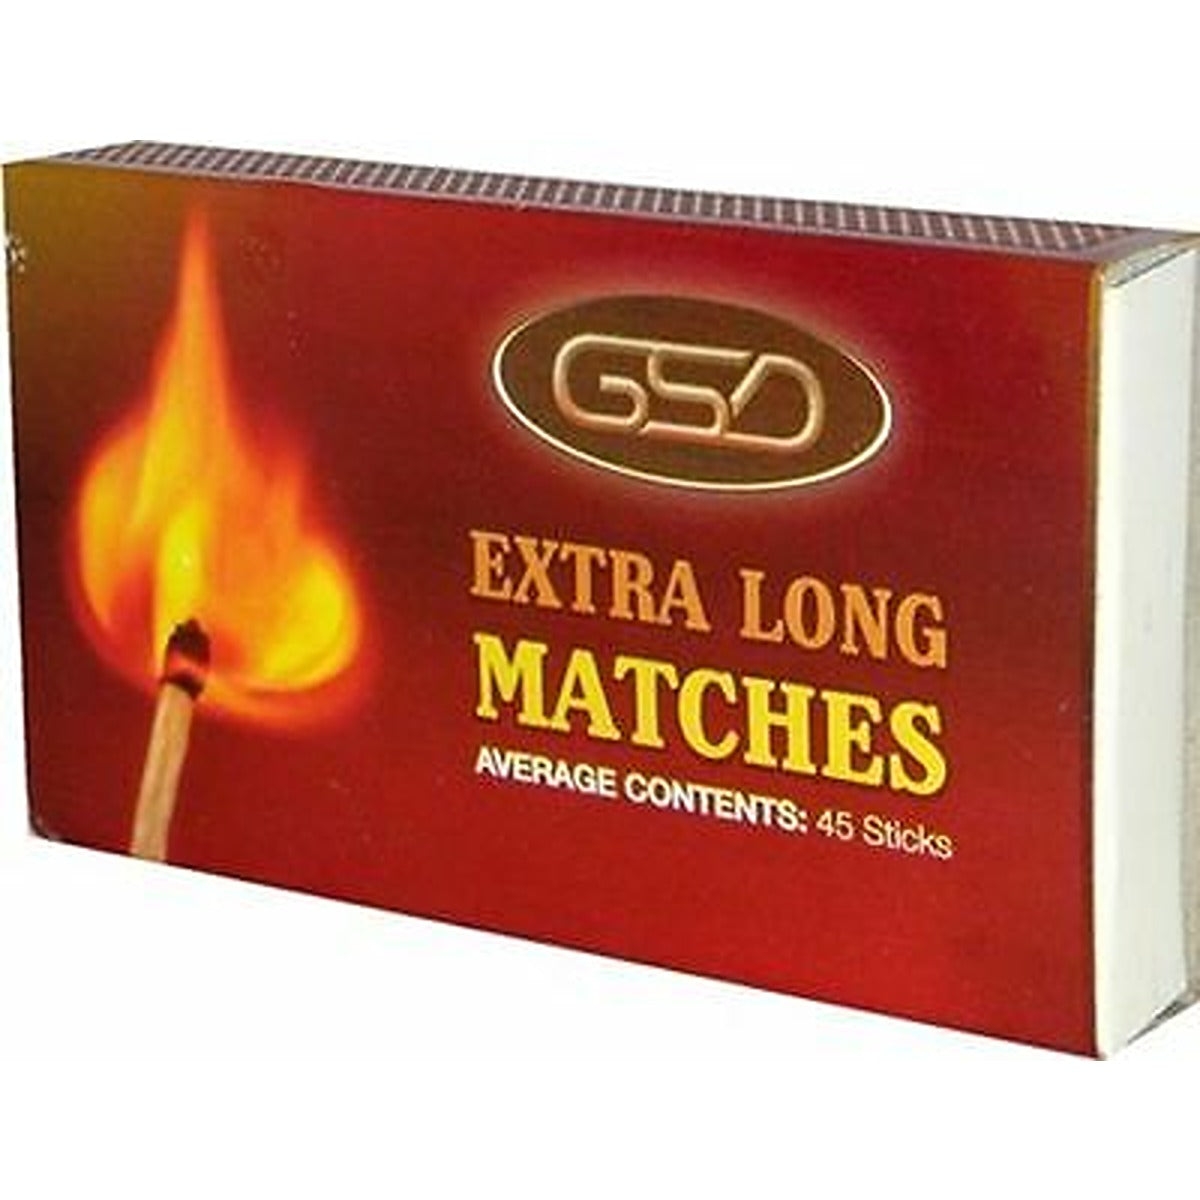 GSD - Extra Long Matches - 45 Sticks - Continental Food Store